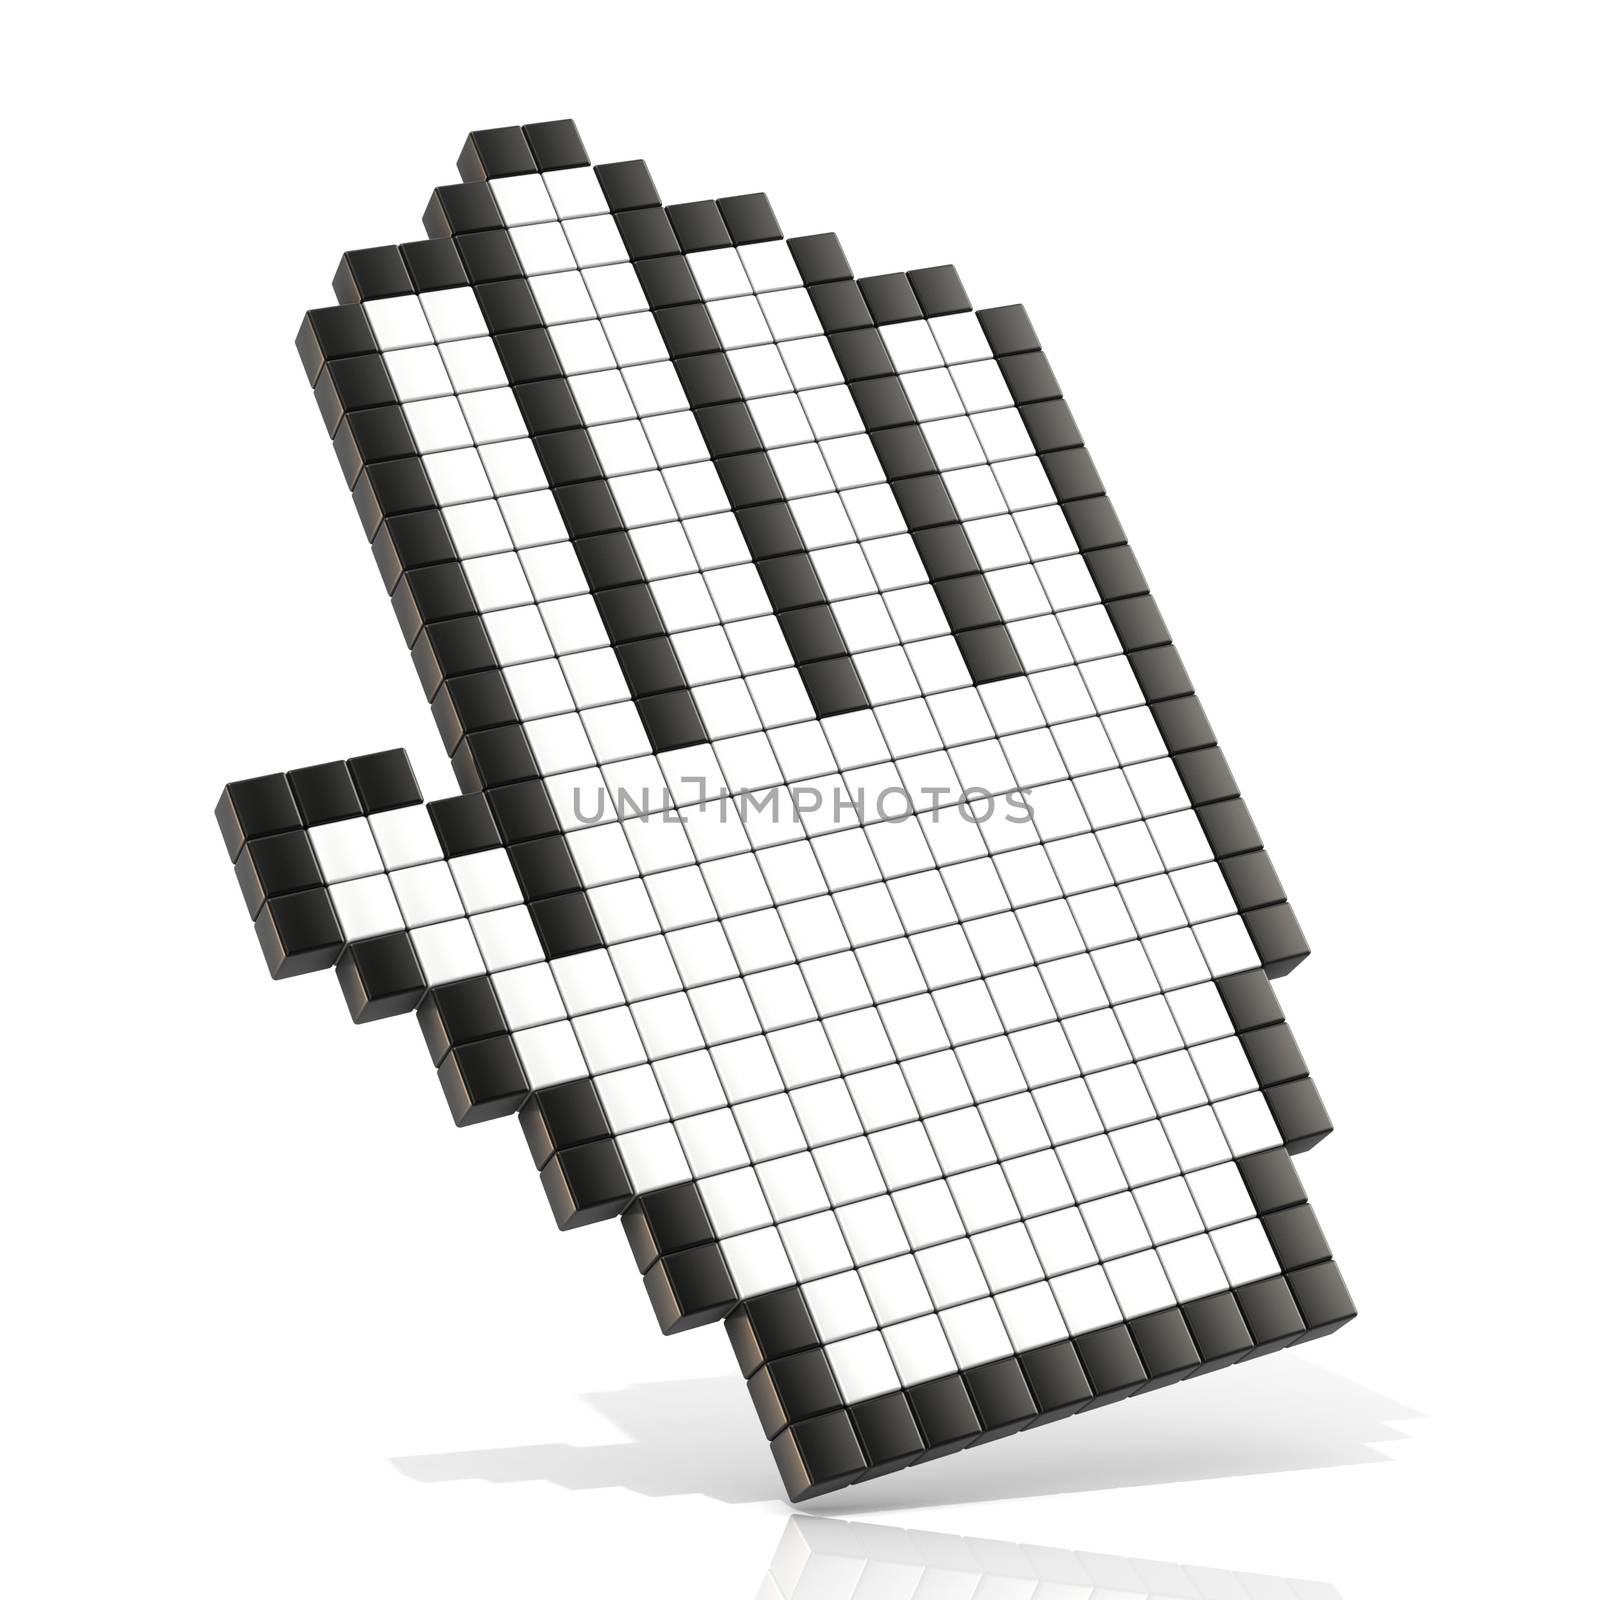 Cursor open hand. 3D render illustration of pan hand isolated on white background